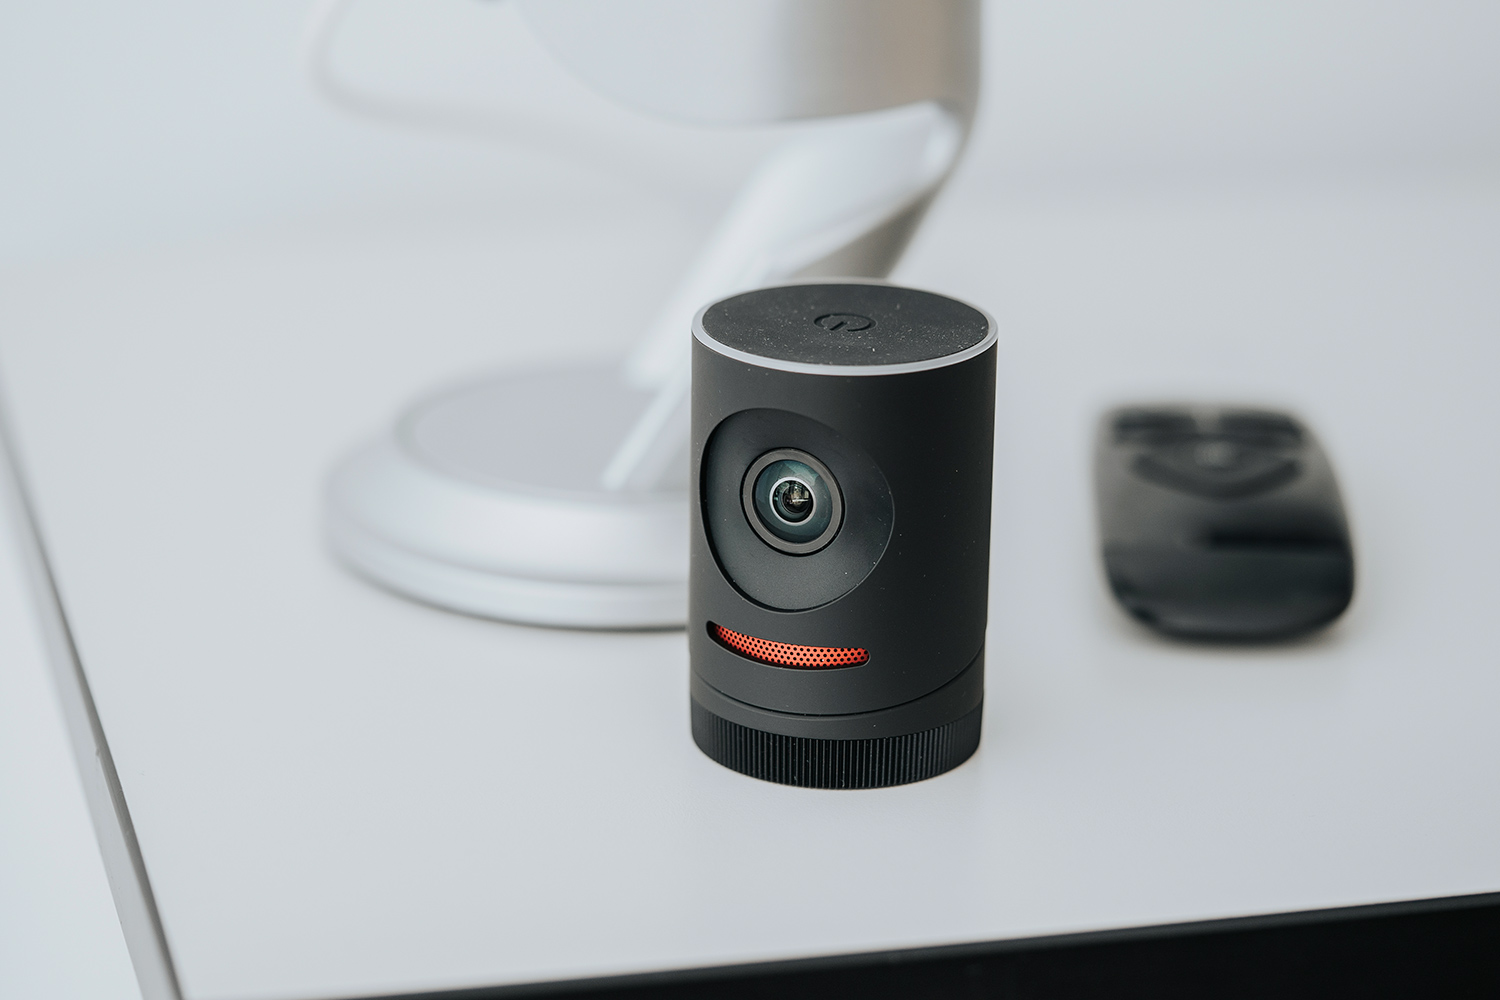 Mevo App: Log into a Different Facebook Account (iOS/Android